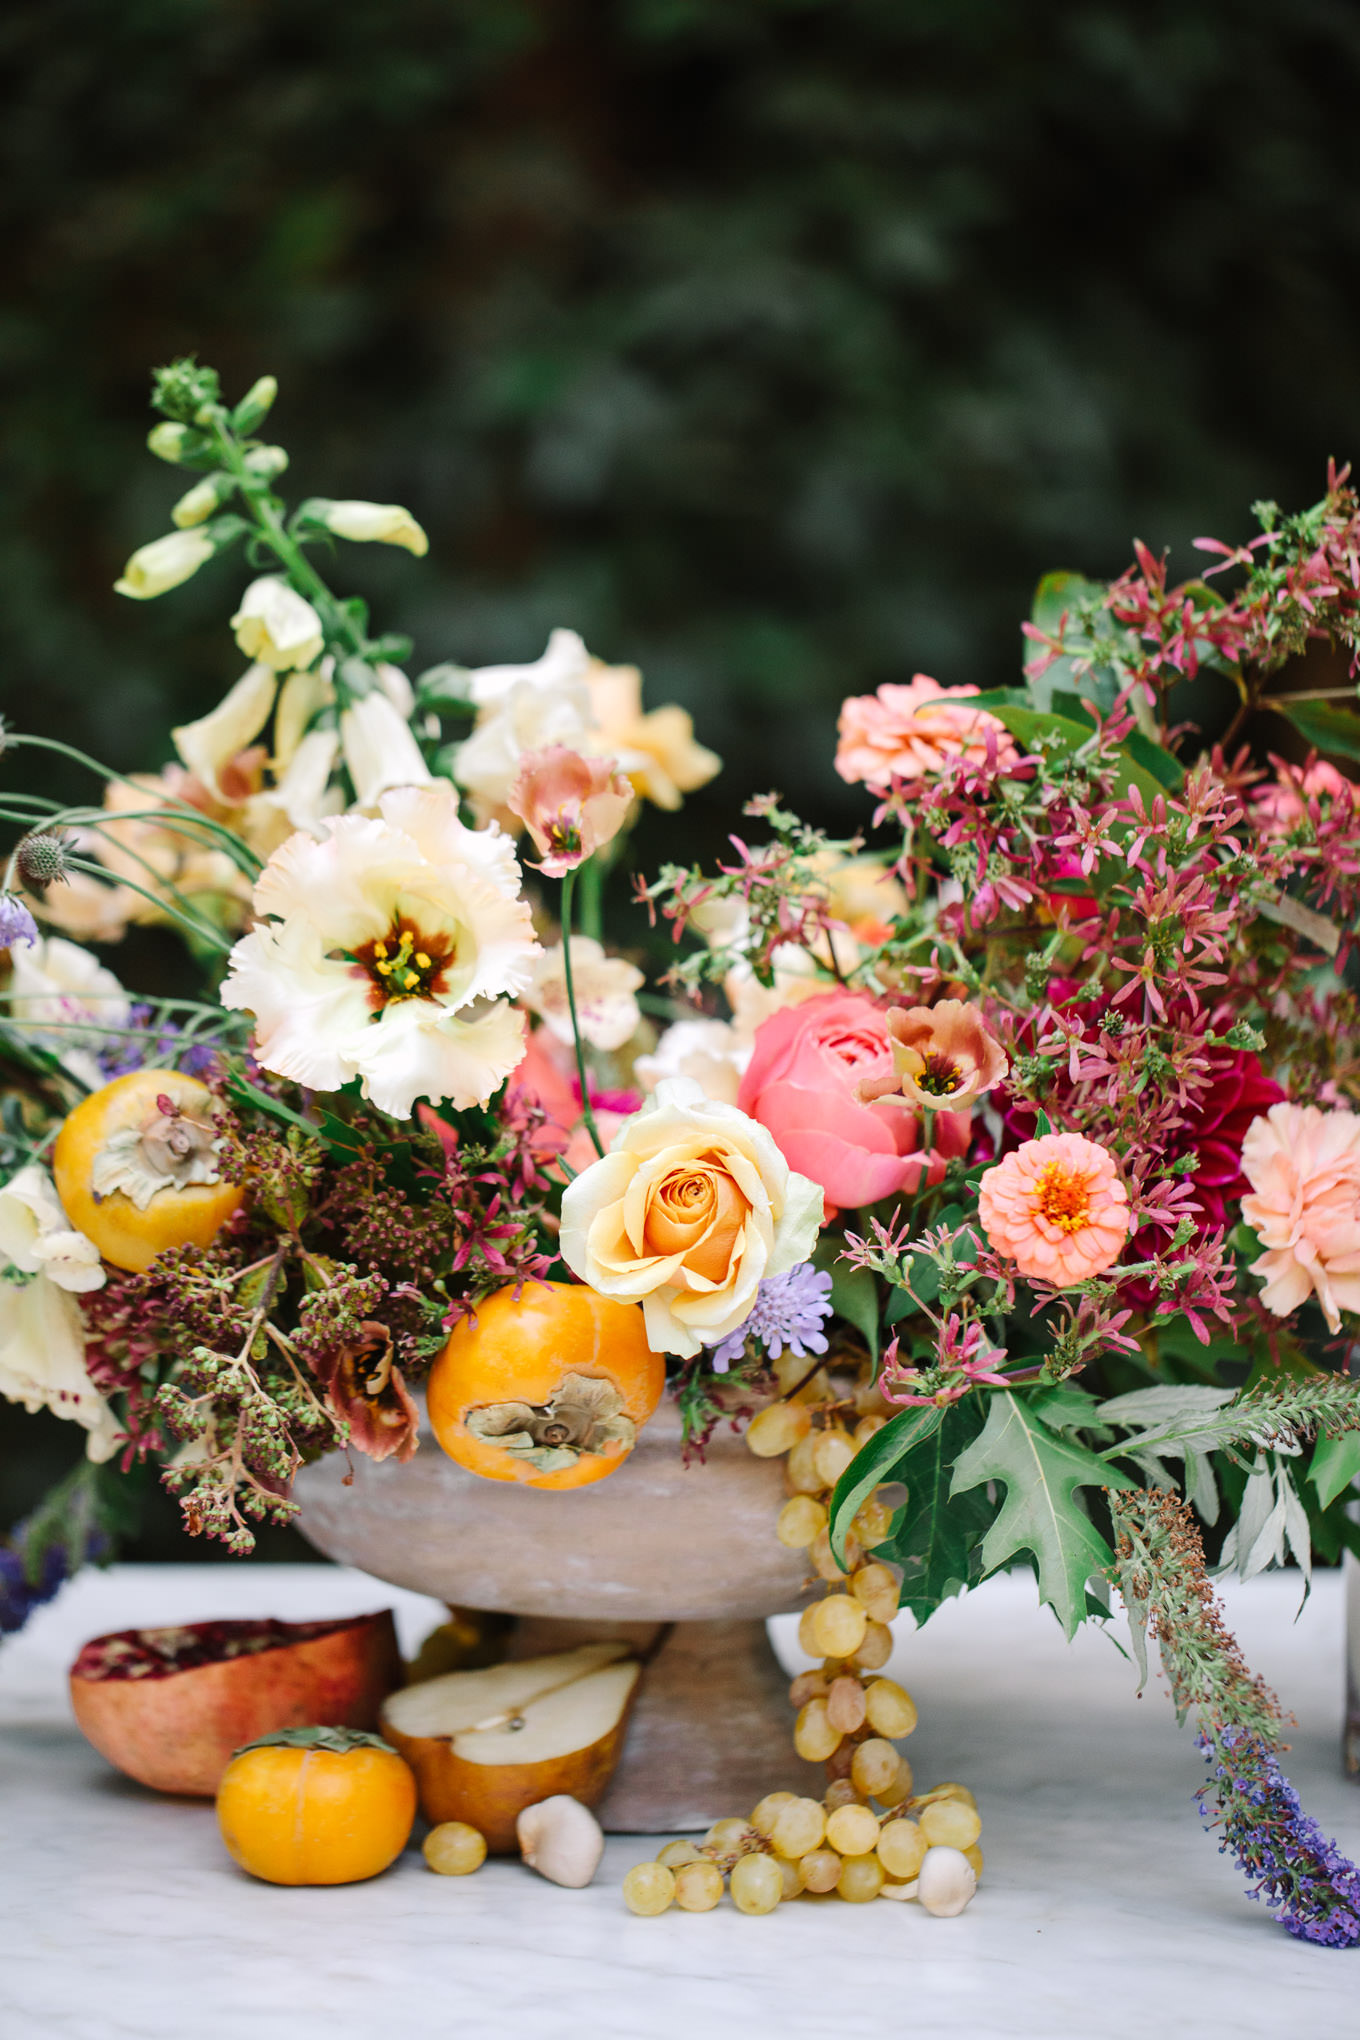 Floral centerpiece with persimmons | Engagement, elopement, and wedding photography roundup of Mary Costa’s favorite images from 2020 | Colorful and elevated photography for fun-loving couples in Southern California | #2020wedding #elopement #weddingphoto #weddingphotography #microwedding   Source: Mary Costa Photography | Los Angeles